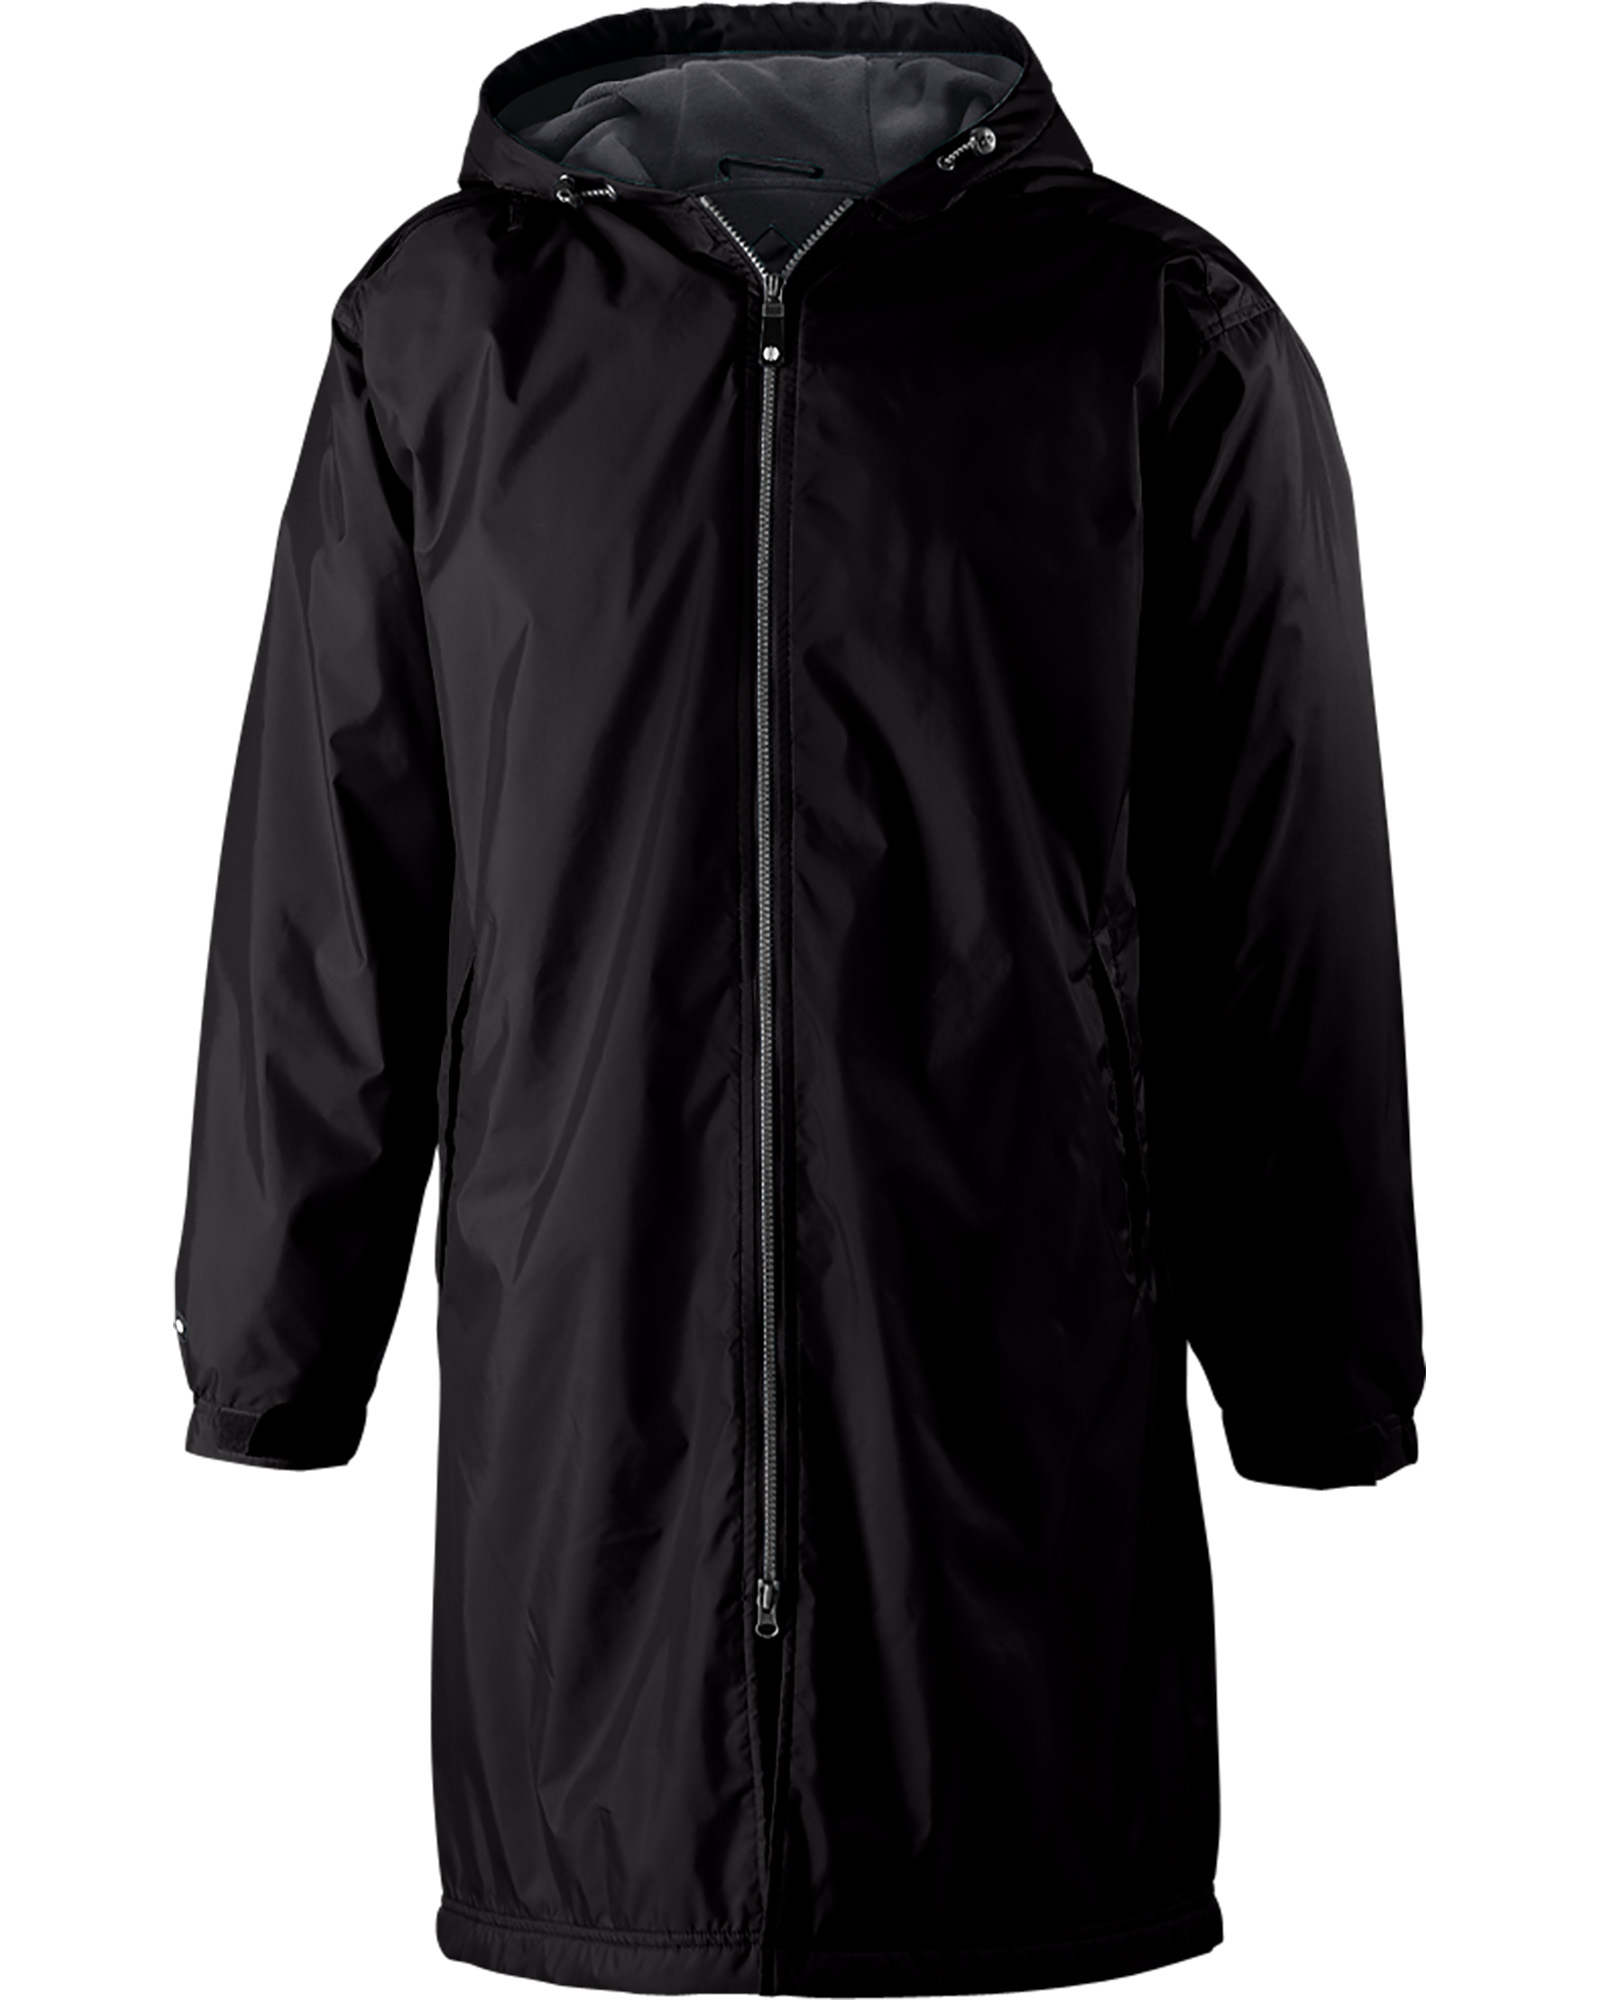 Holloway 229162 - Adult Polyester Full Zip Conquest Jacket